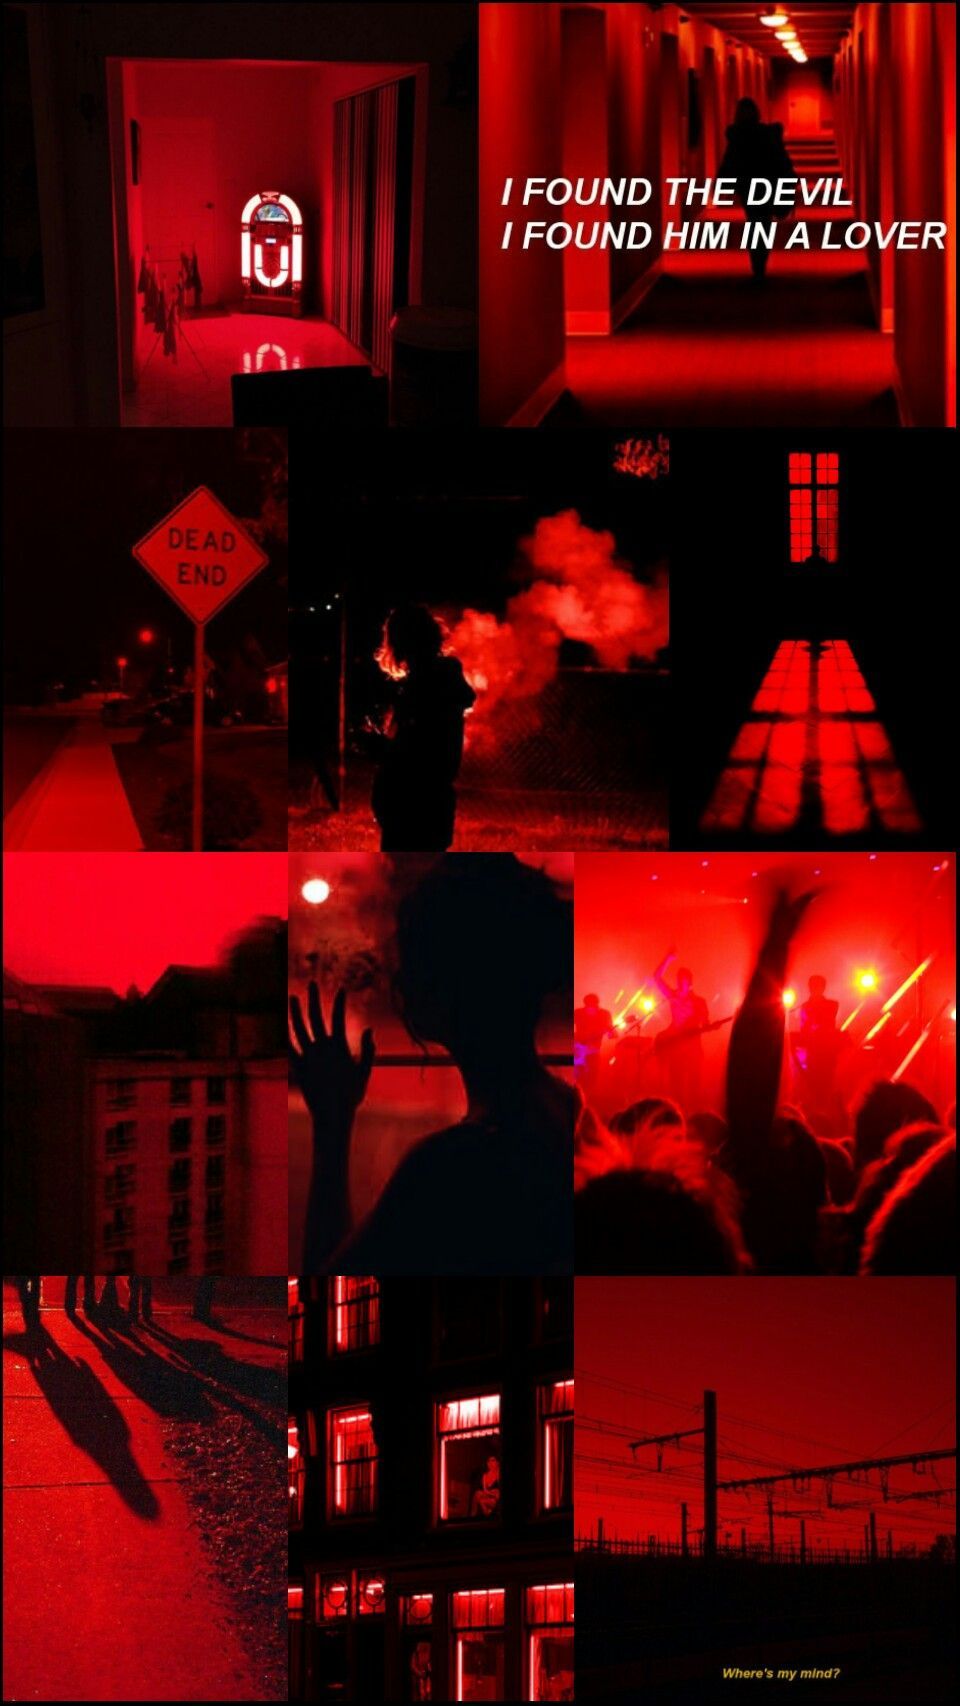 Red Aesthetic Backgrounds Tumblr posted by Michelle Anderson